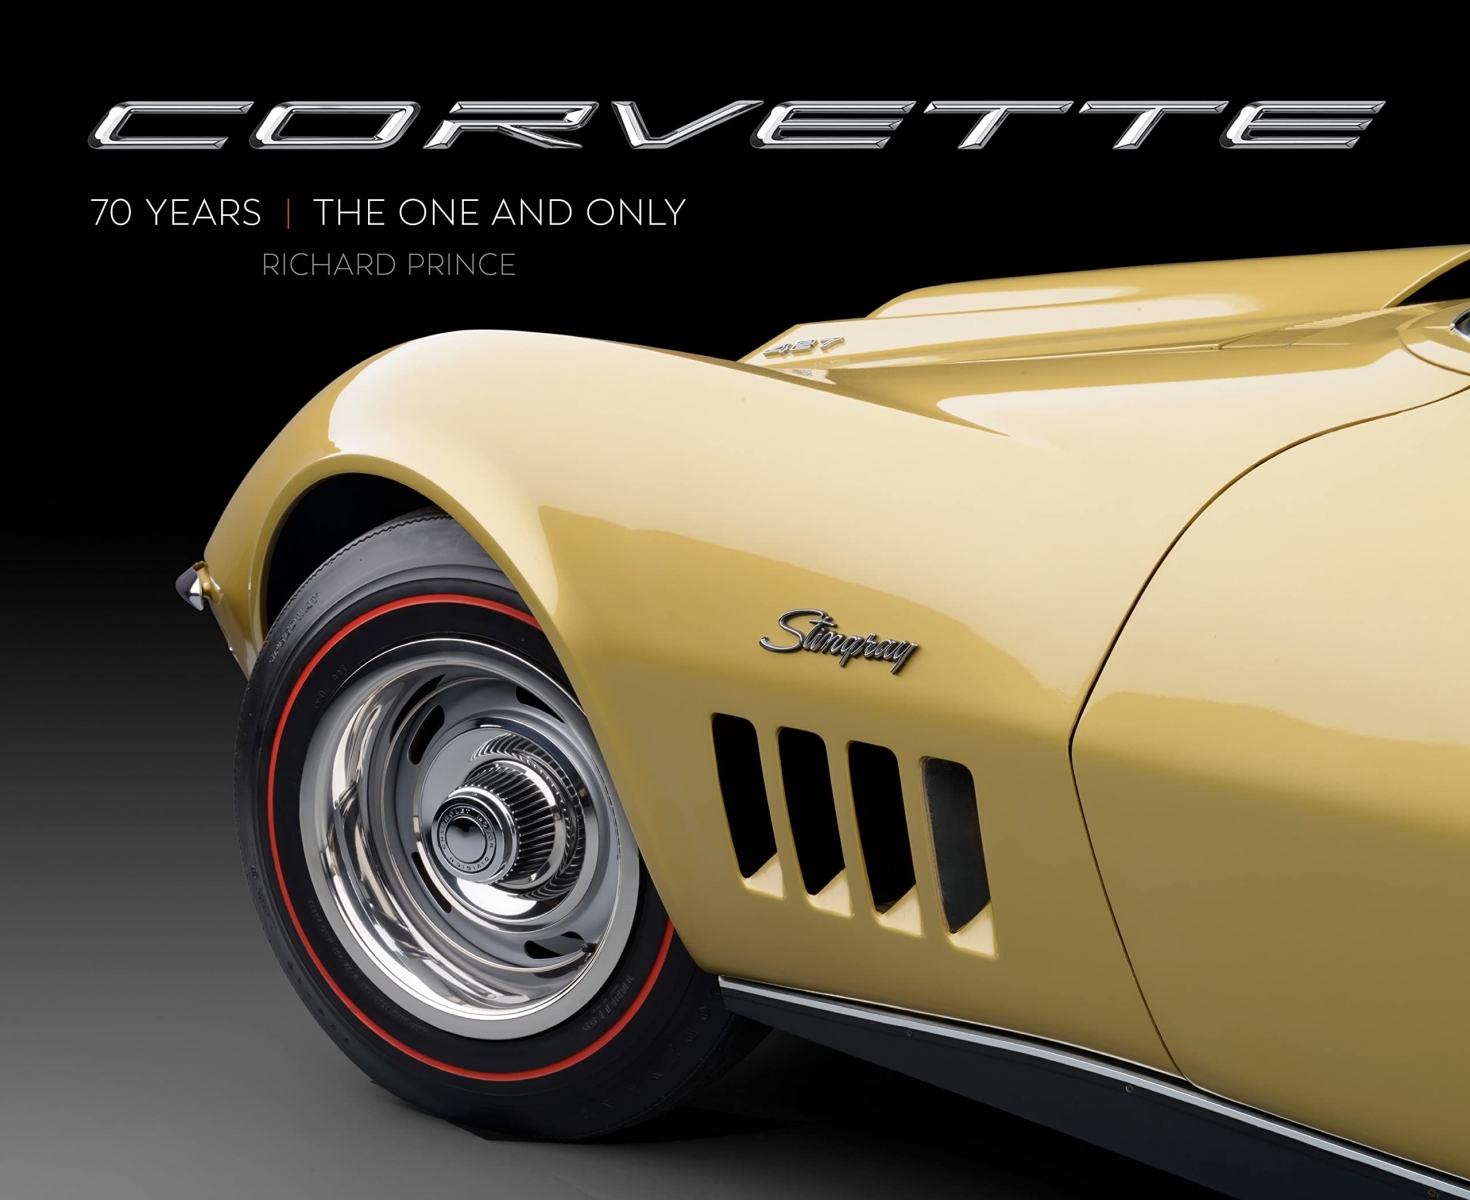 Richard, Prince Corvette 70 Years: The One and Only 